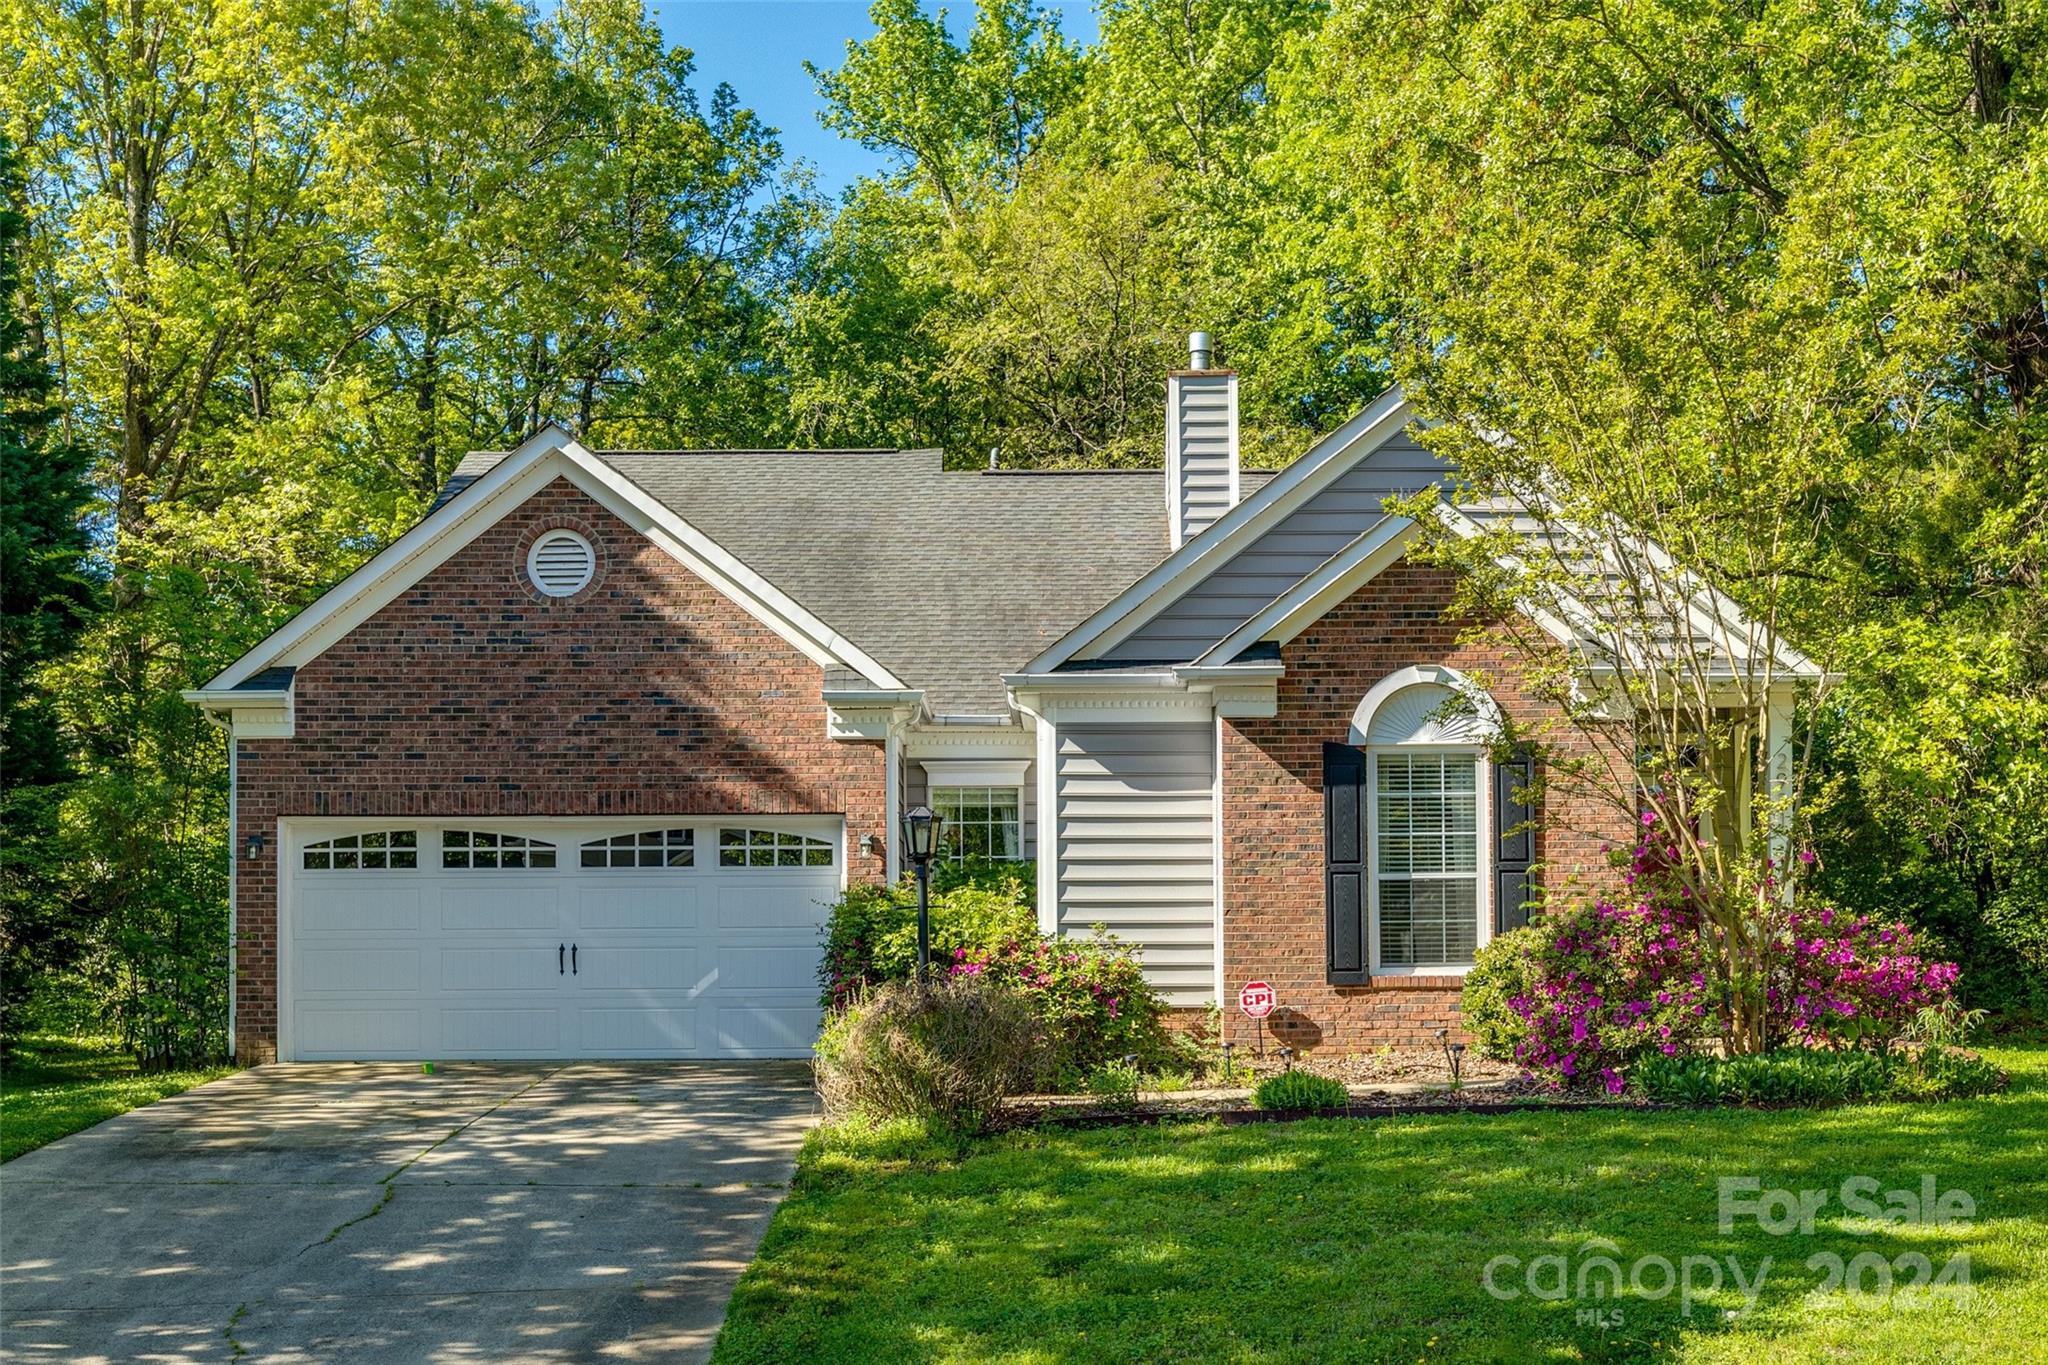 Photo one of 2931 Canary Ct Charlotte NC 28269 | MLS 4129652